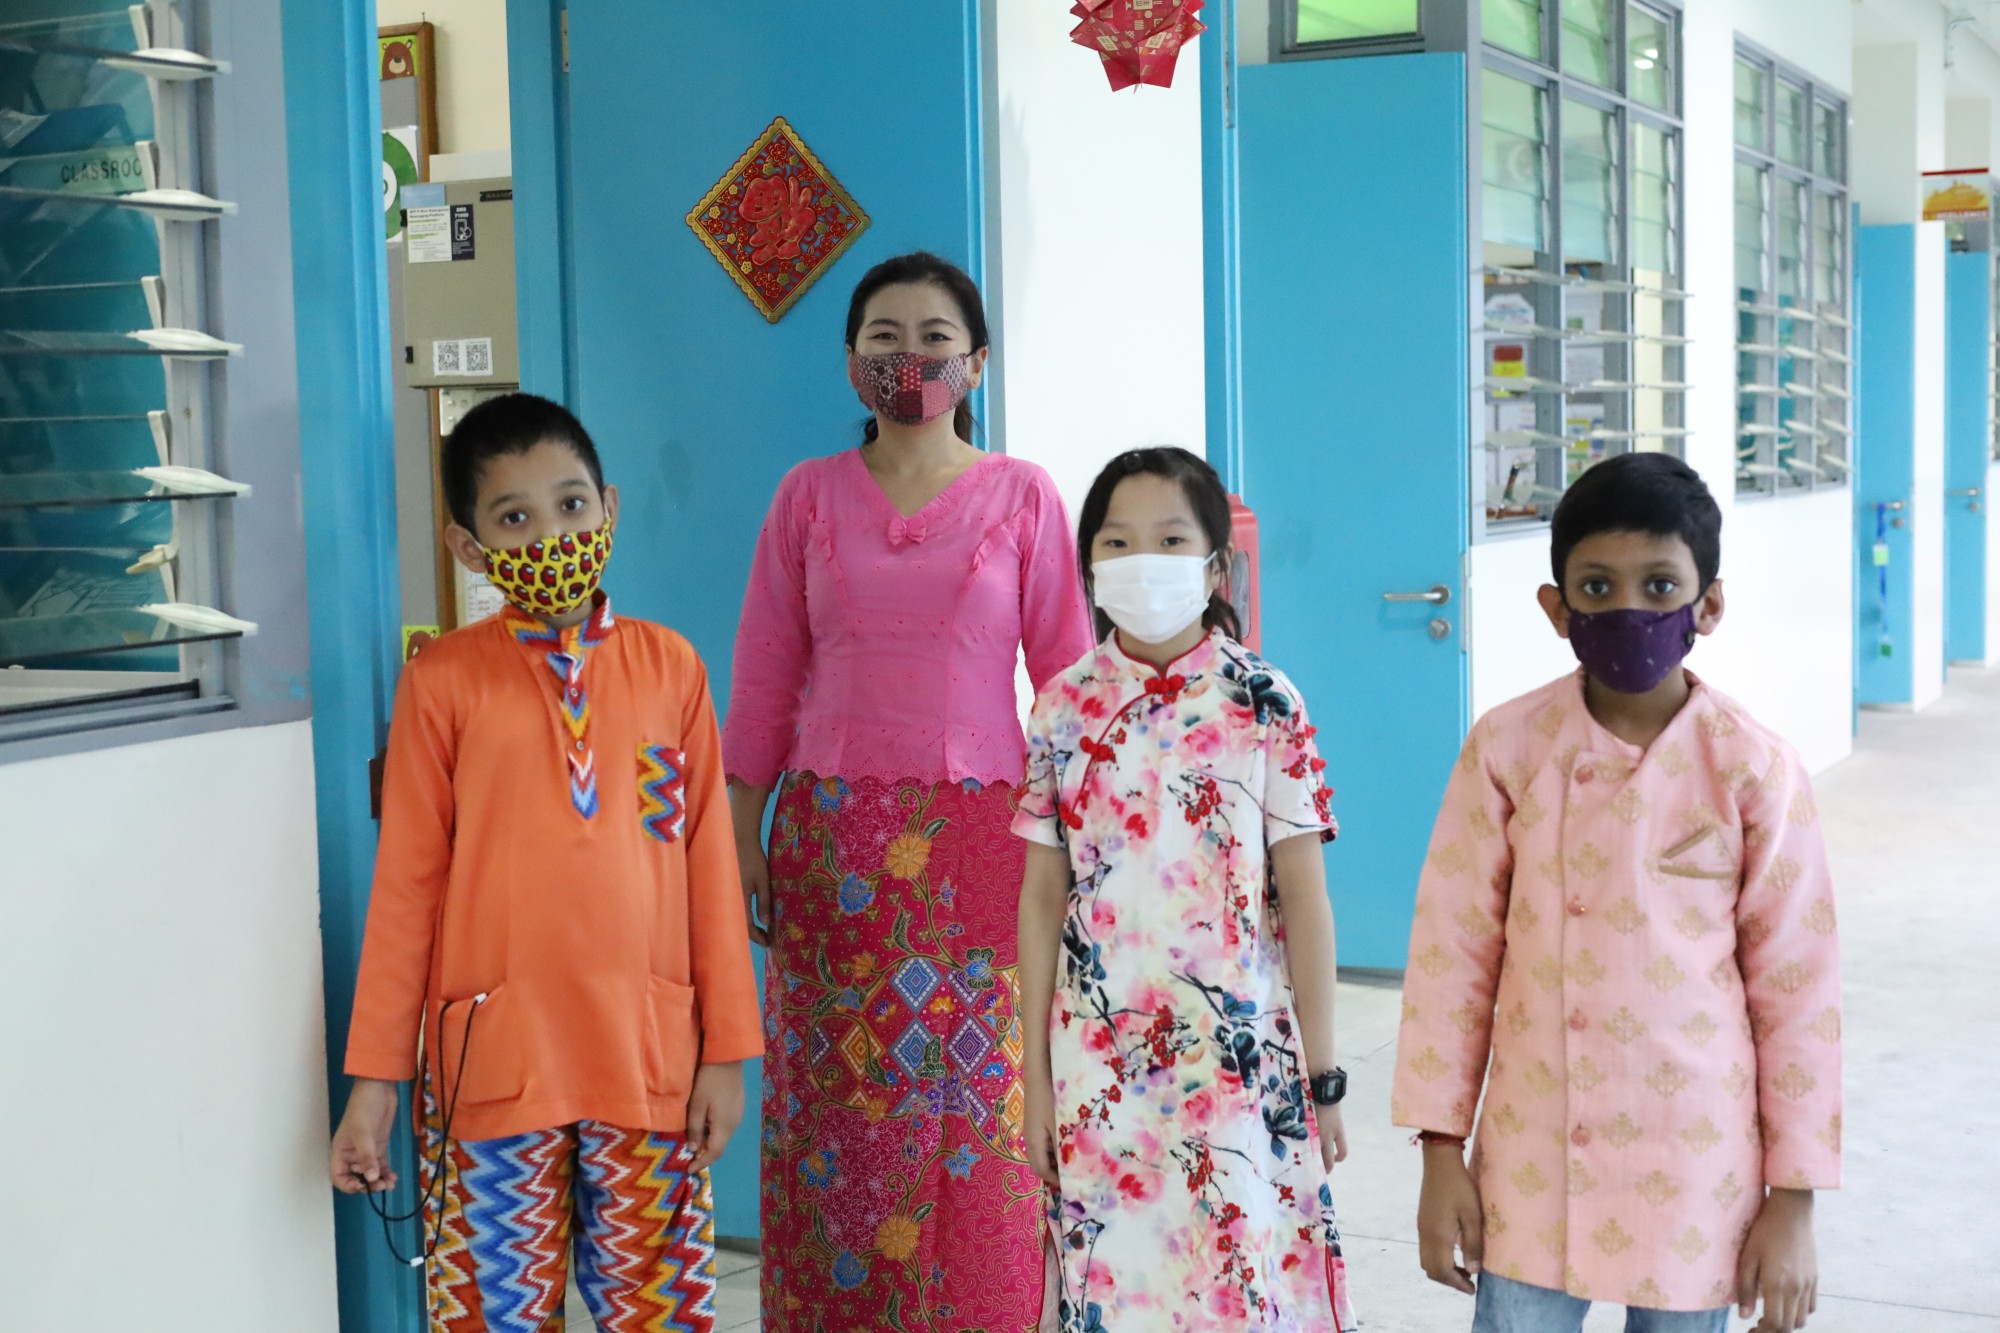 Ms Loy and students adorned in their colourful traditional costumes